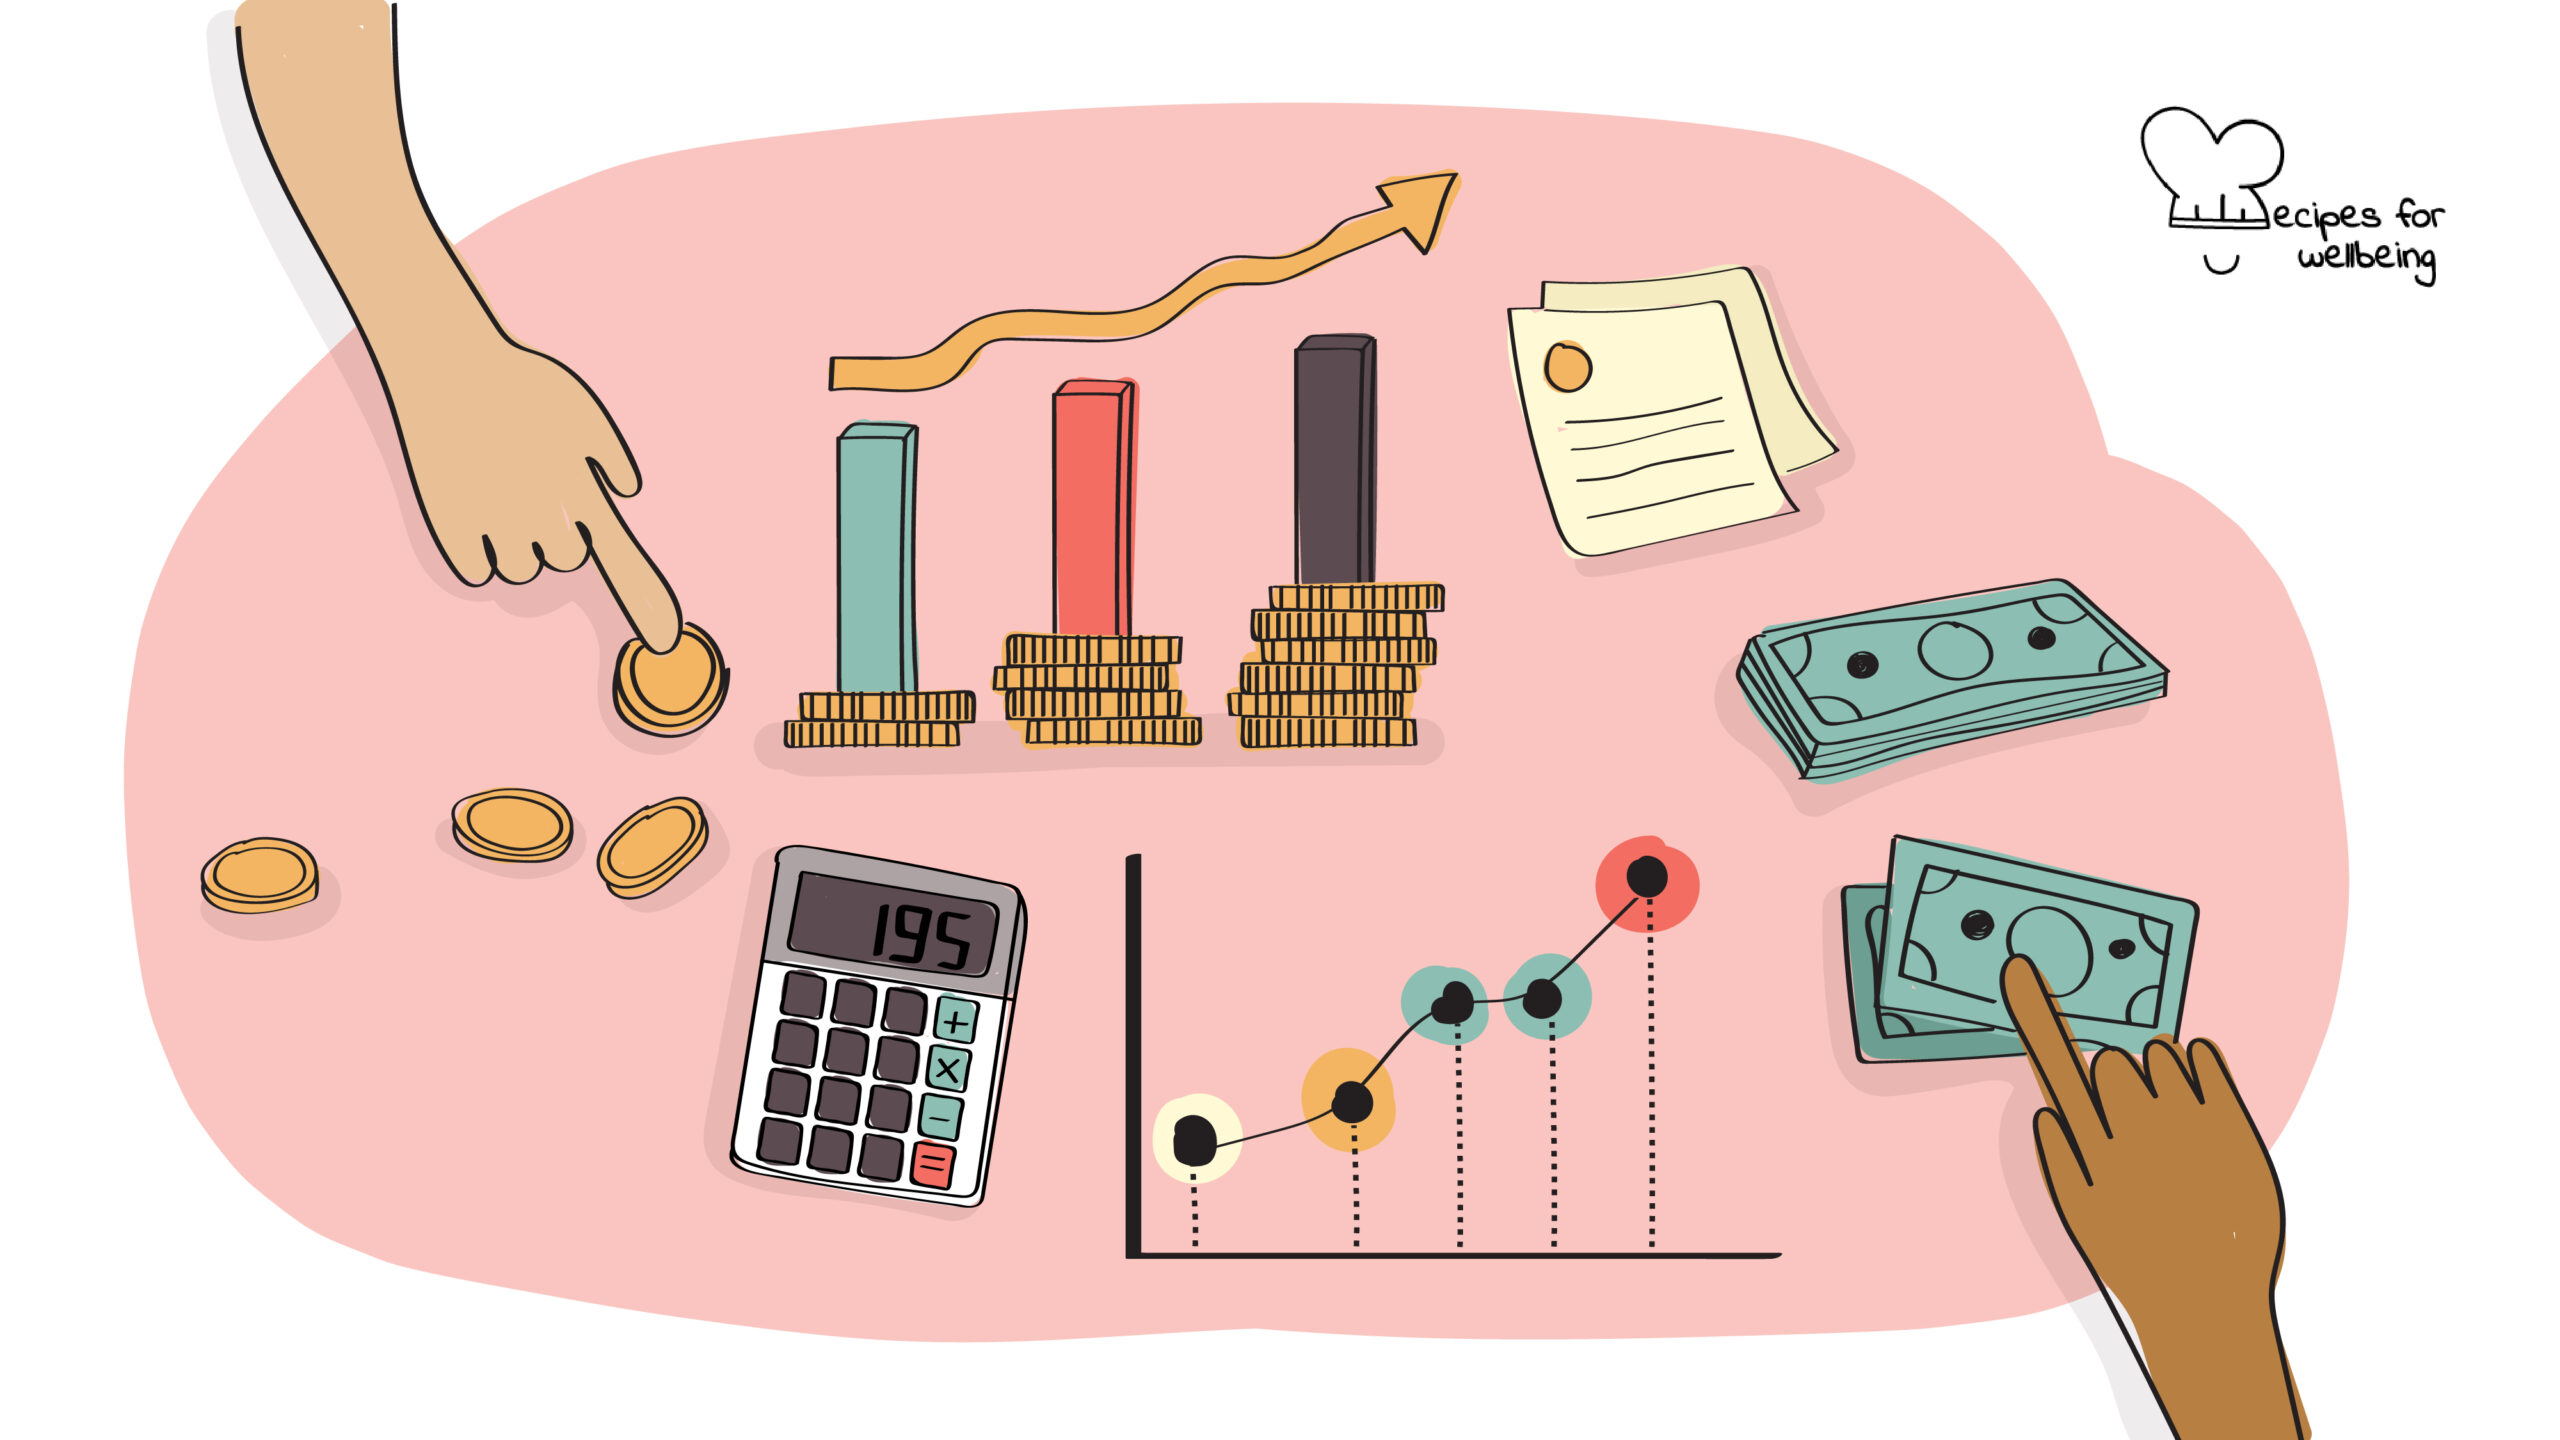 Illustration of 2 hands touching different economic icons such as coins, banknotes, a calculator, and bar charts and graphs. © Recipes for Wellbeing